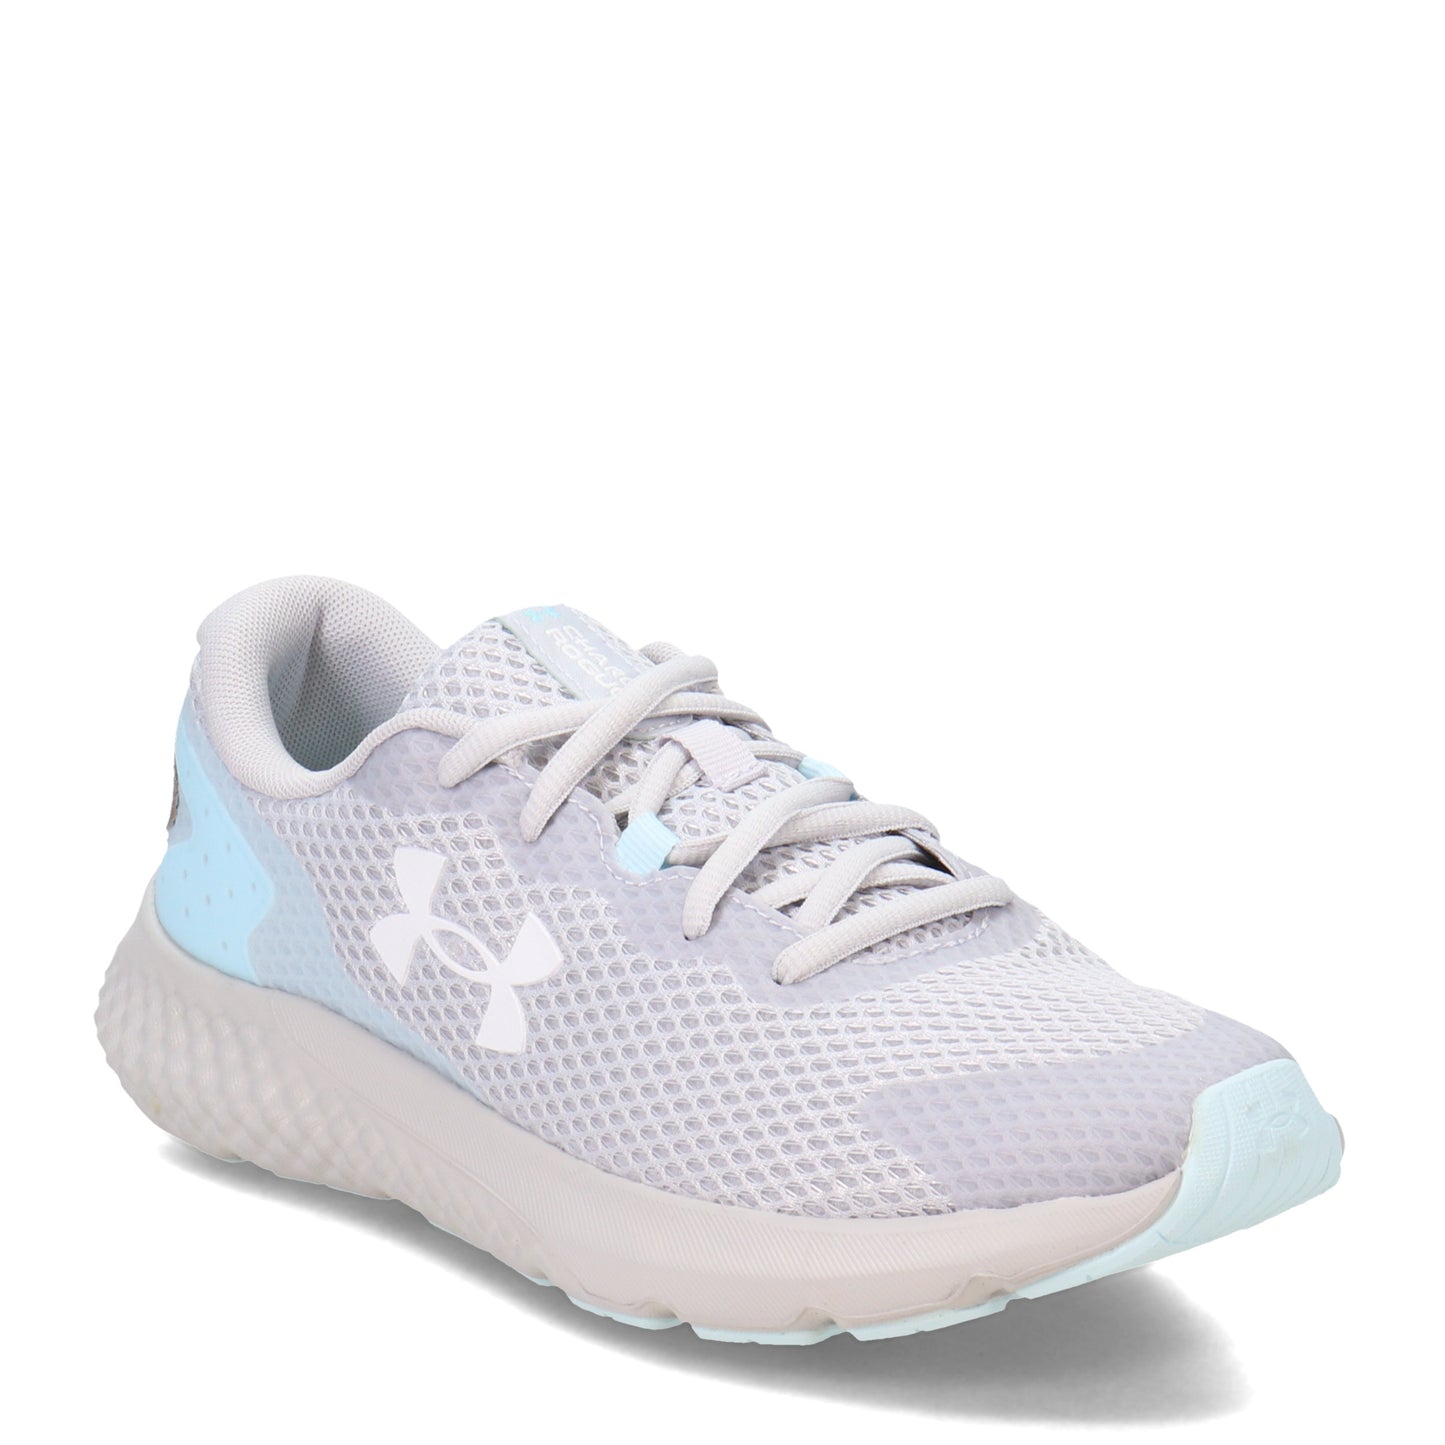 Peltz Shoes  Women's Under Armour Charged Rogue 3 Running Shoe HALO GRAY 3024888-108